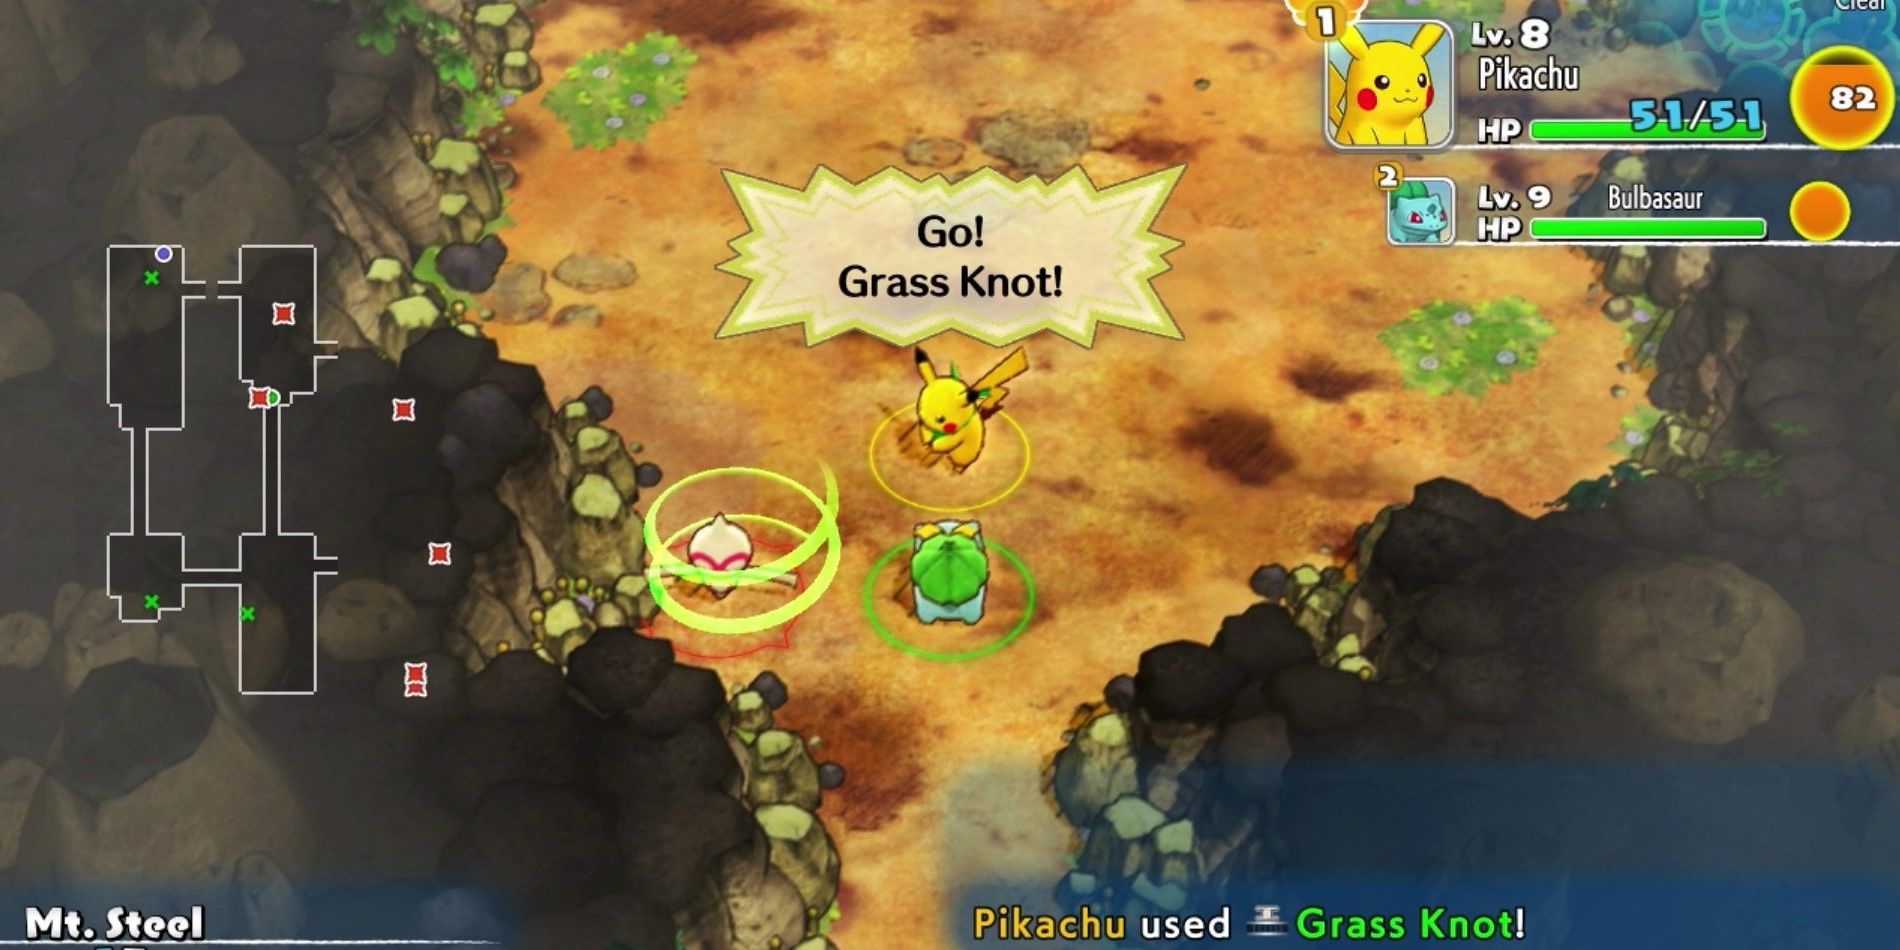 download pokemon super mystery dungeon decrypted rom